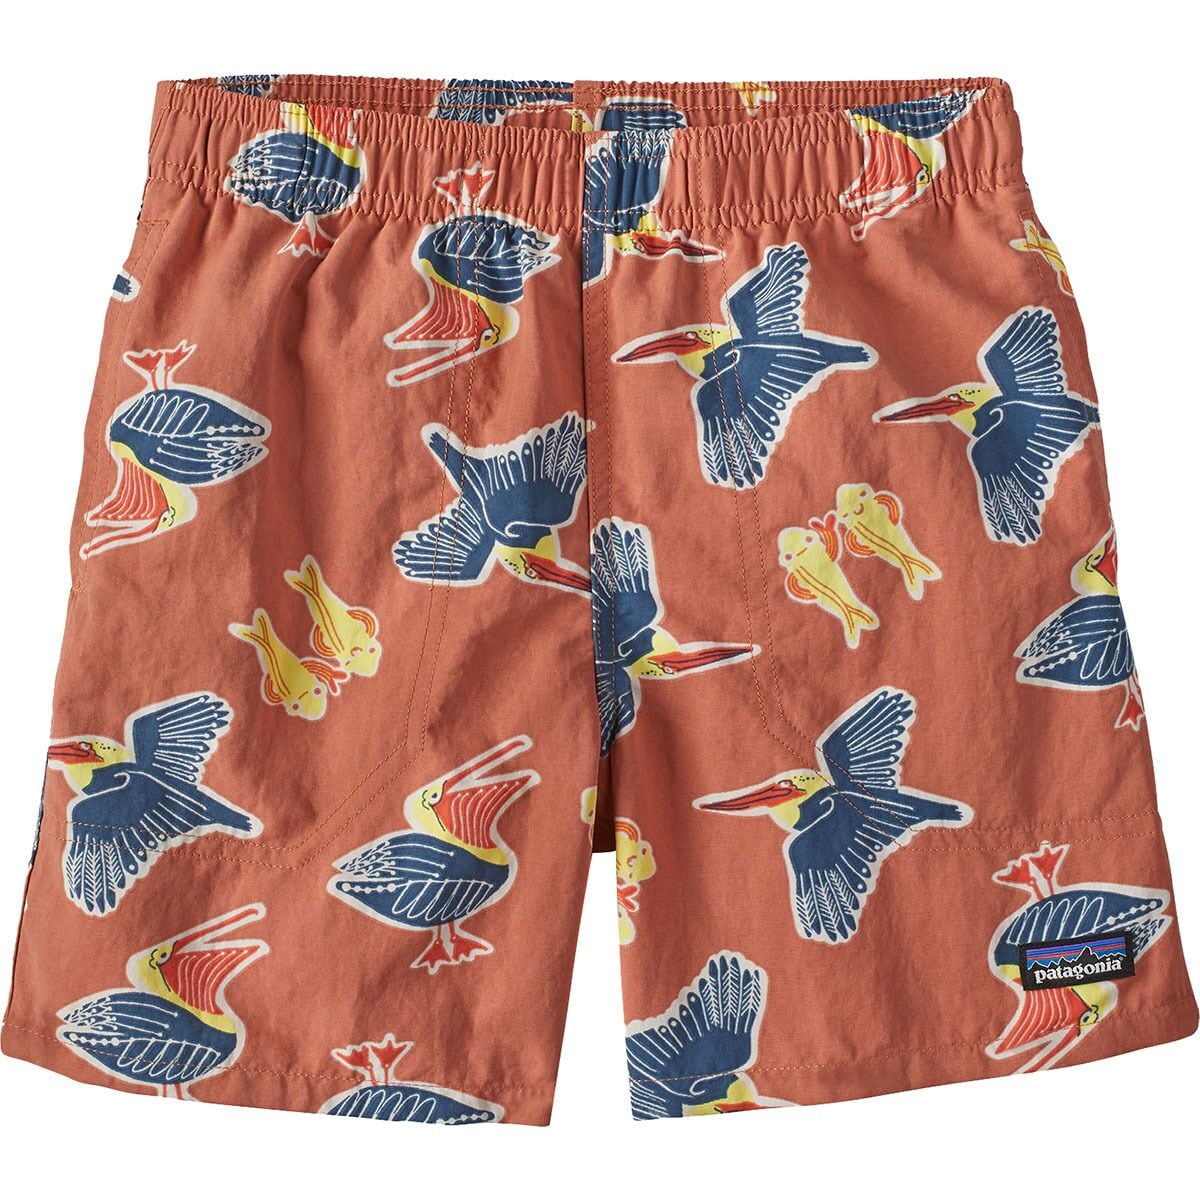 Patagonia Kids Baggies Shorts 5 in. - Lined Amigos: Sienna Clay XS